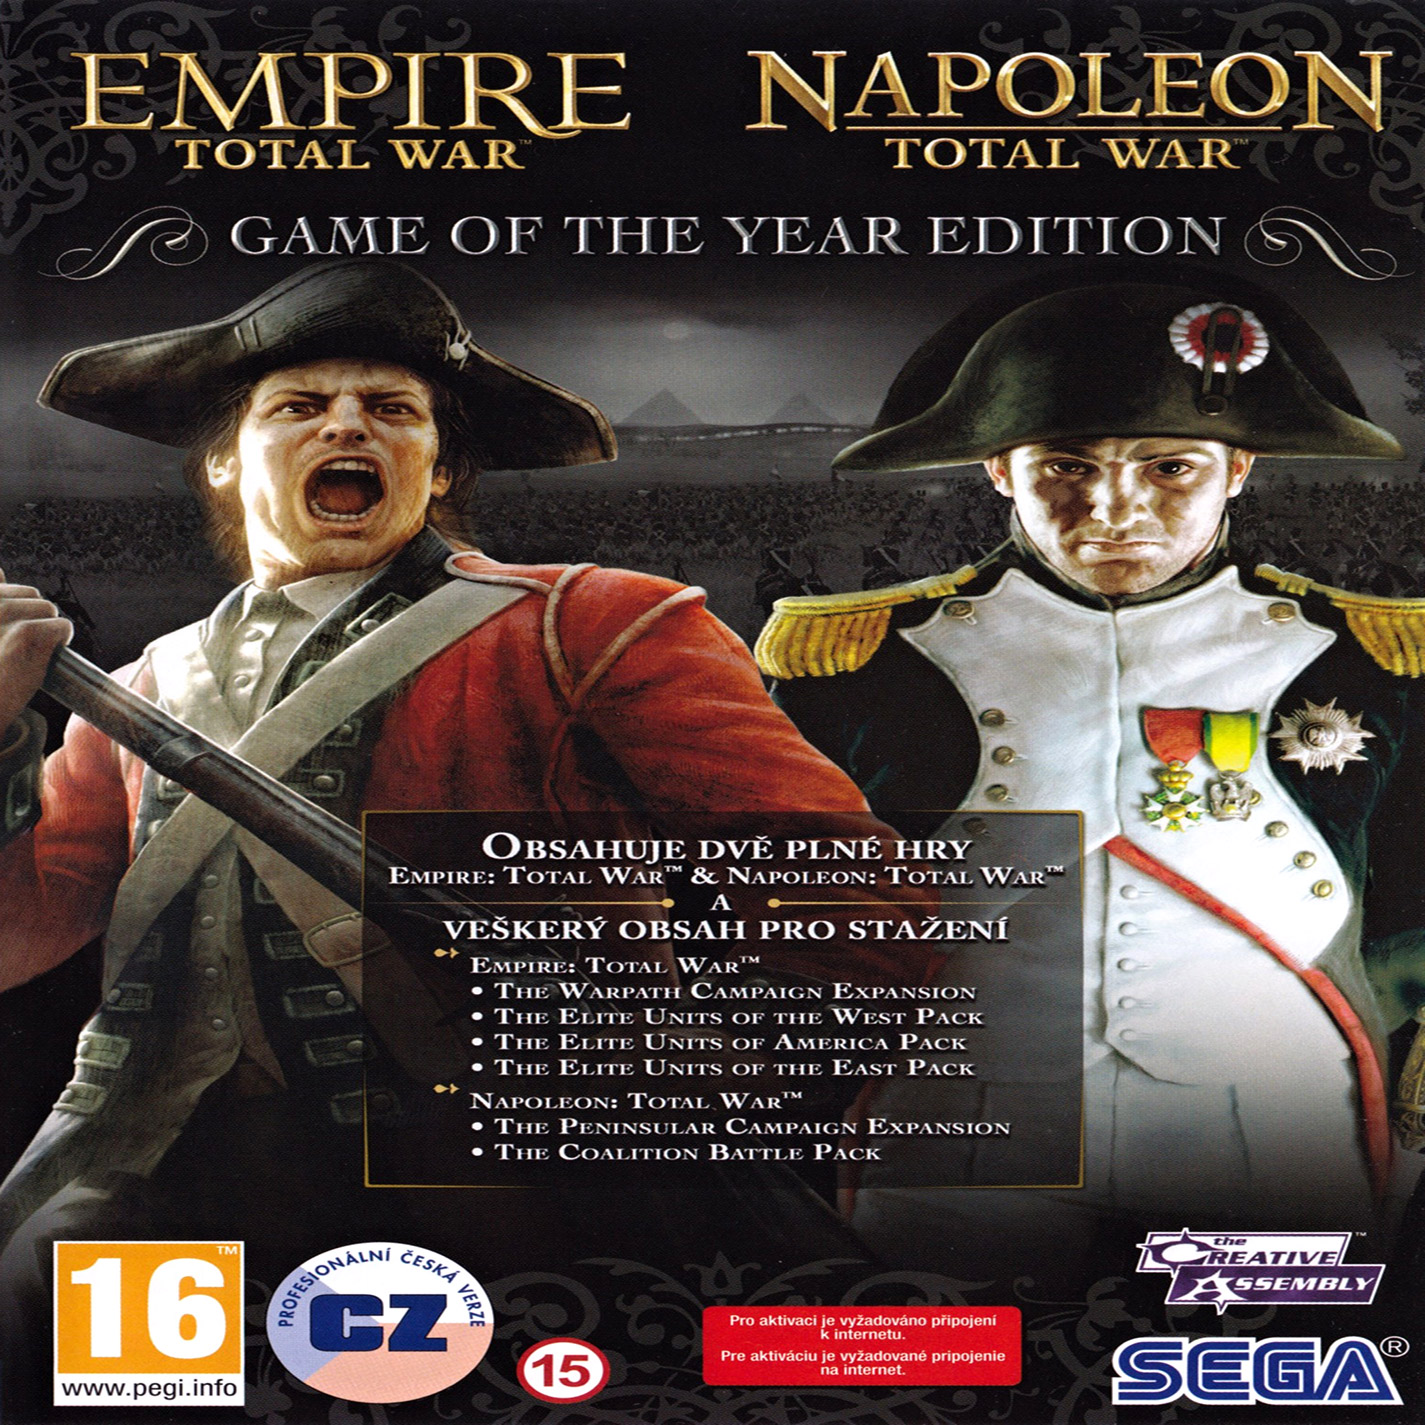 Empire & Napoleon: Total War - Game of the Year Edition - predn CD obal